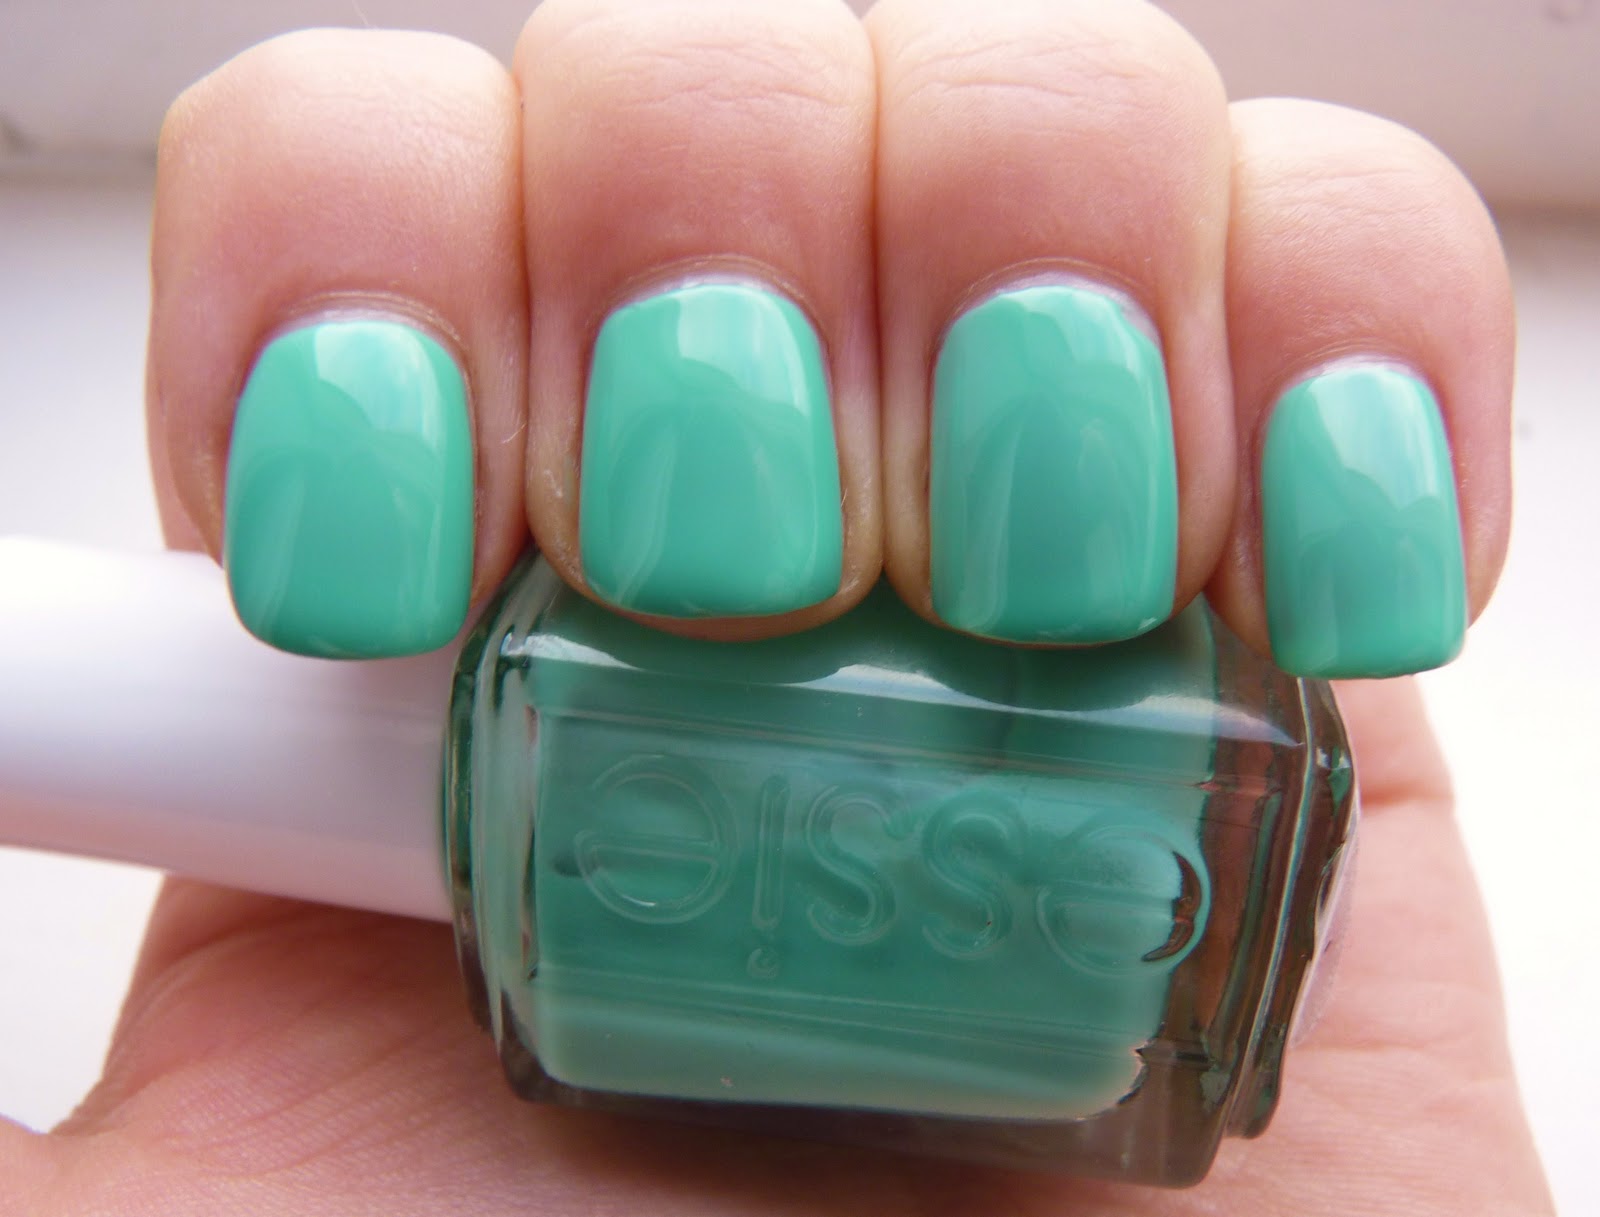 2. Essie Nail Polish in "Turquoise & Caicos" - wide 2